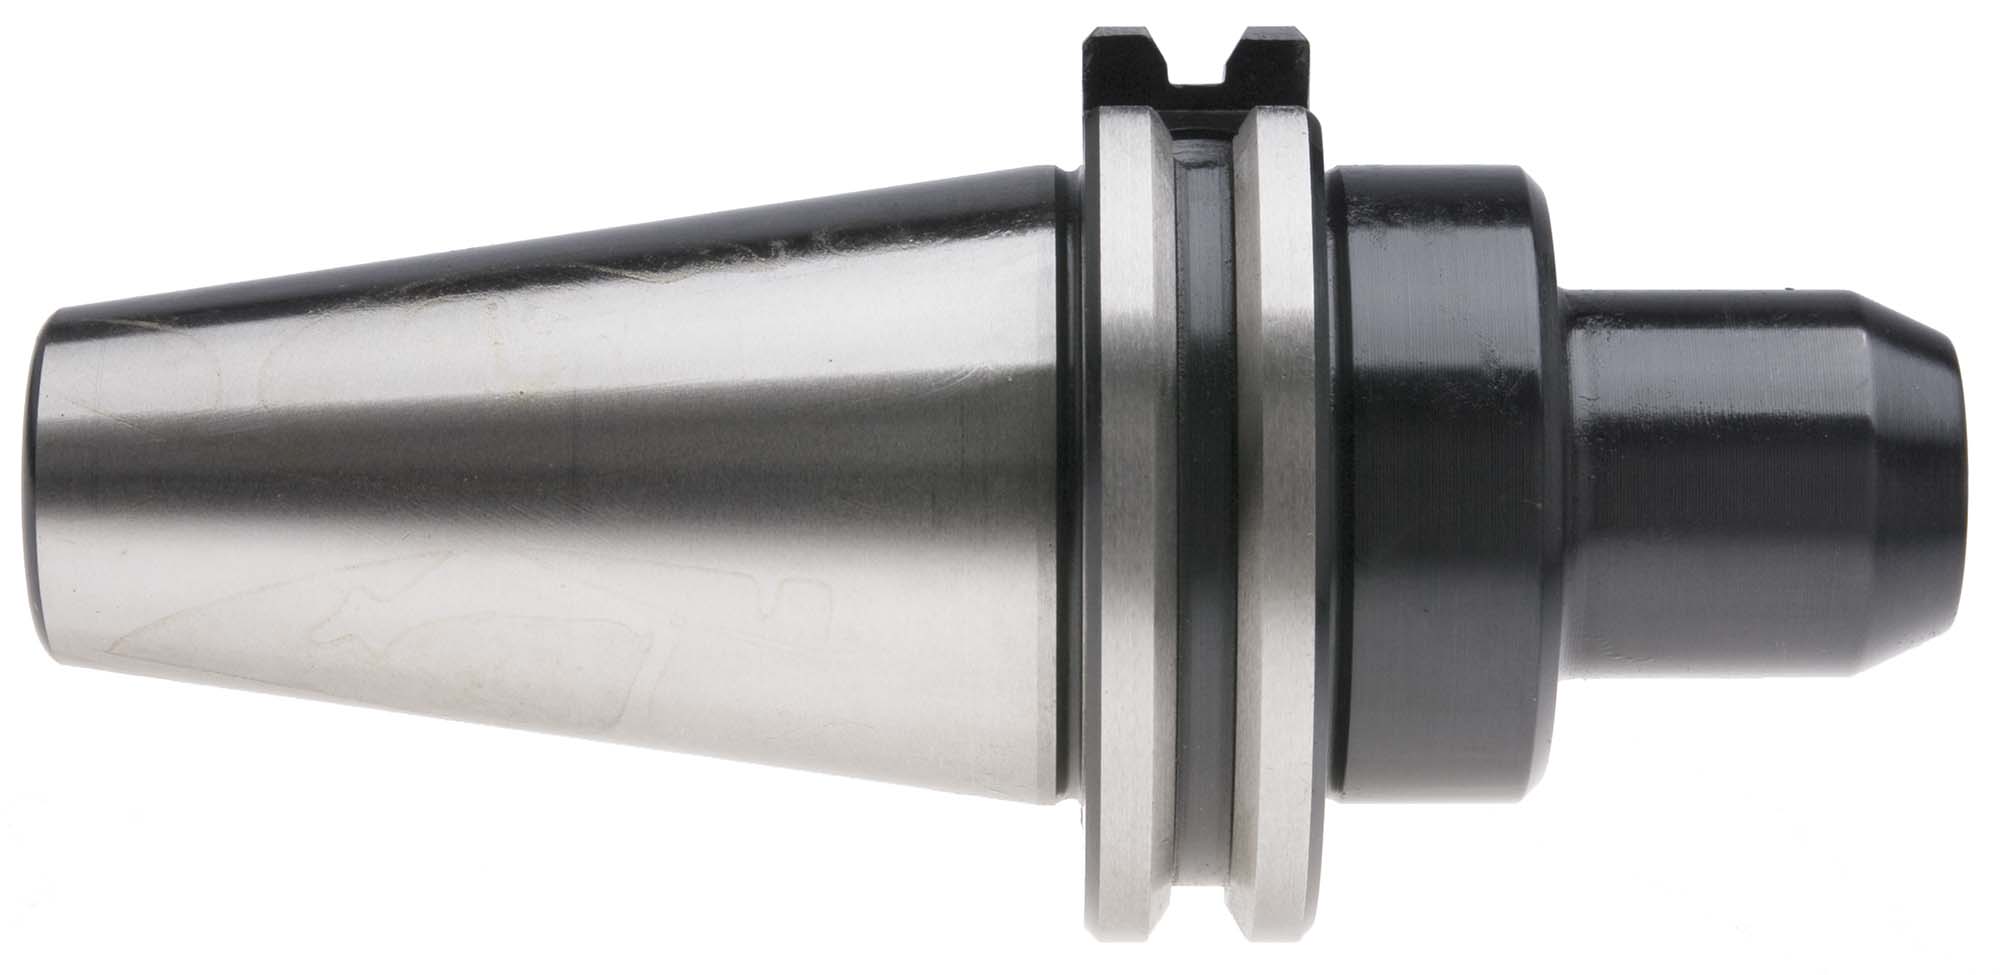 1-1/4" Cat 50 End Mill Adapter